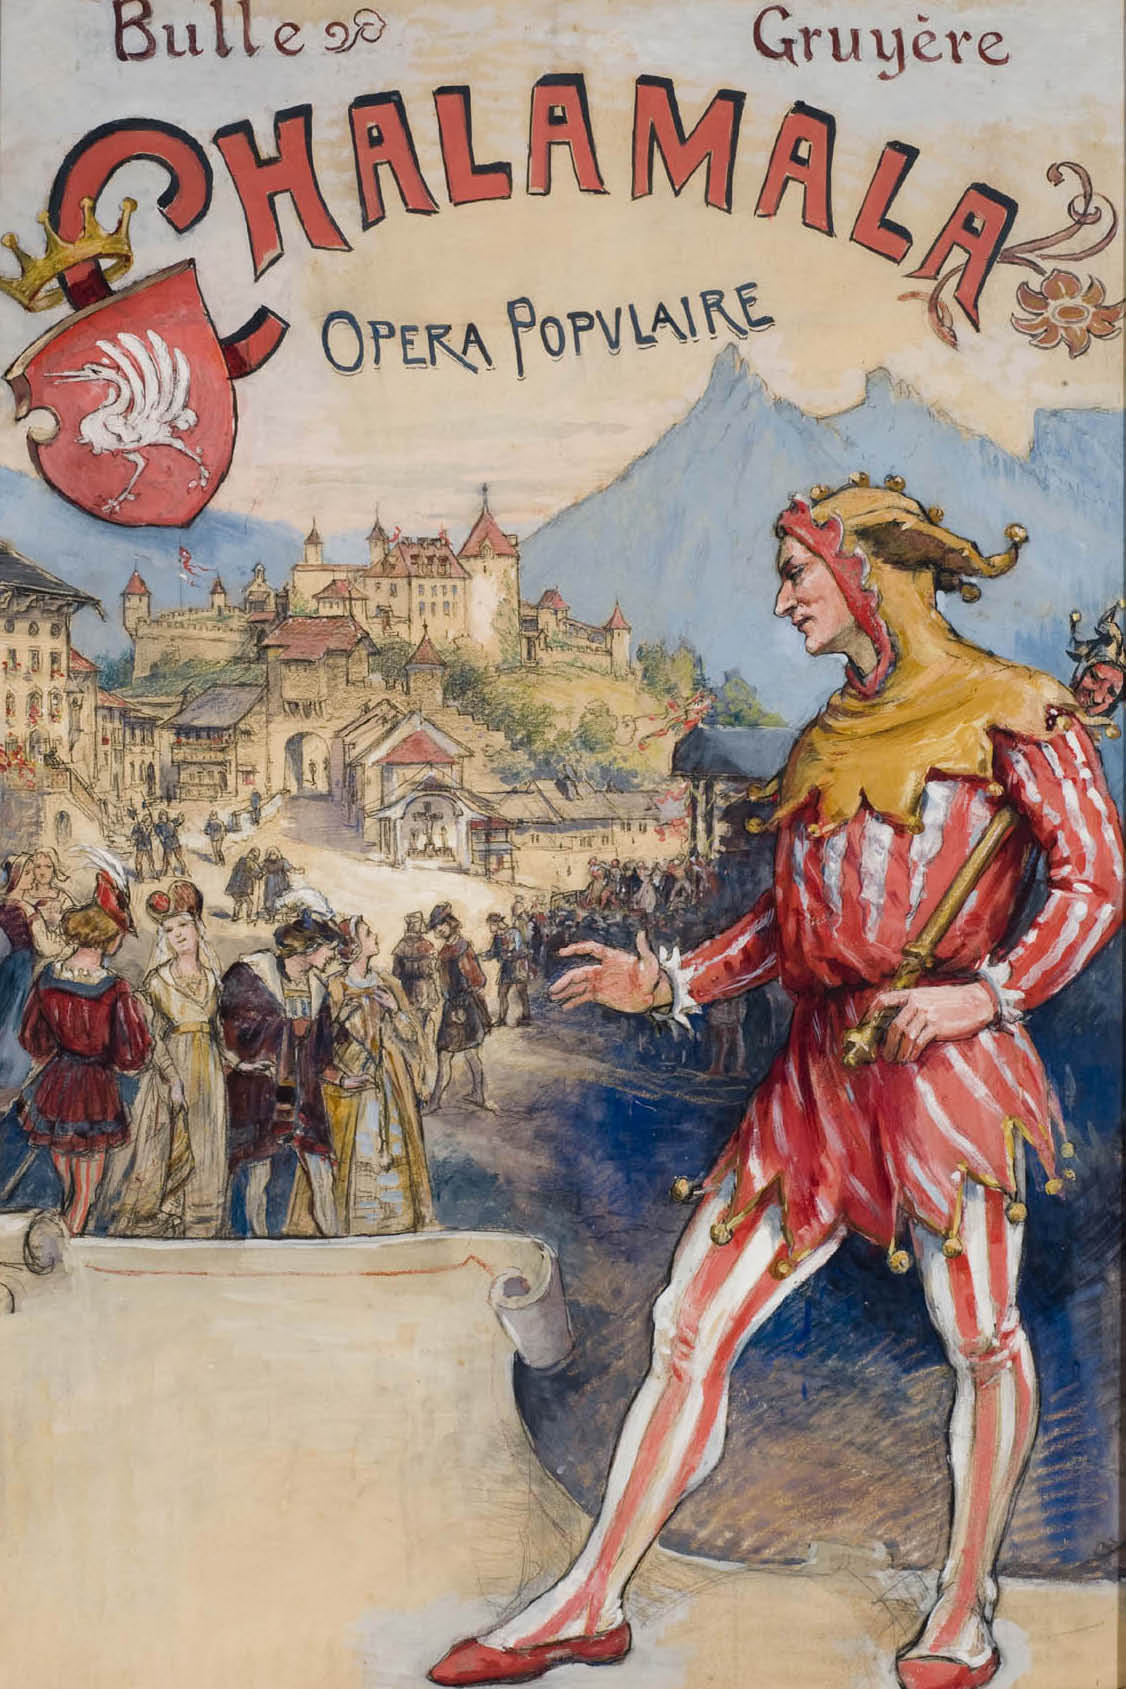 Chalamala Opéra Populaire, Gruyères, poster design for a performance in Bulle in 1910 © Musée gruérien, Bulle